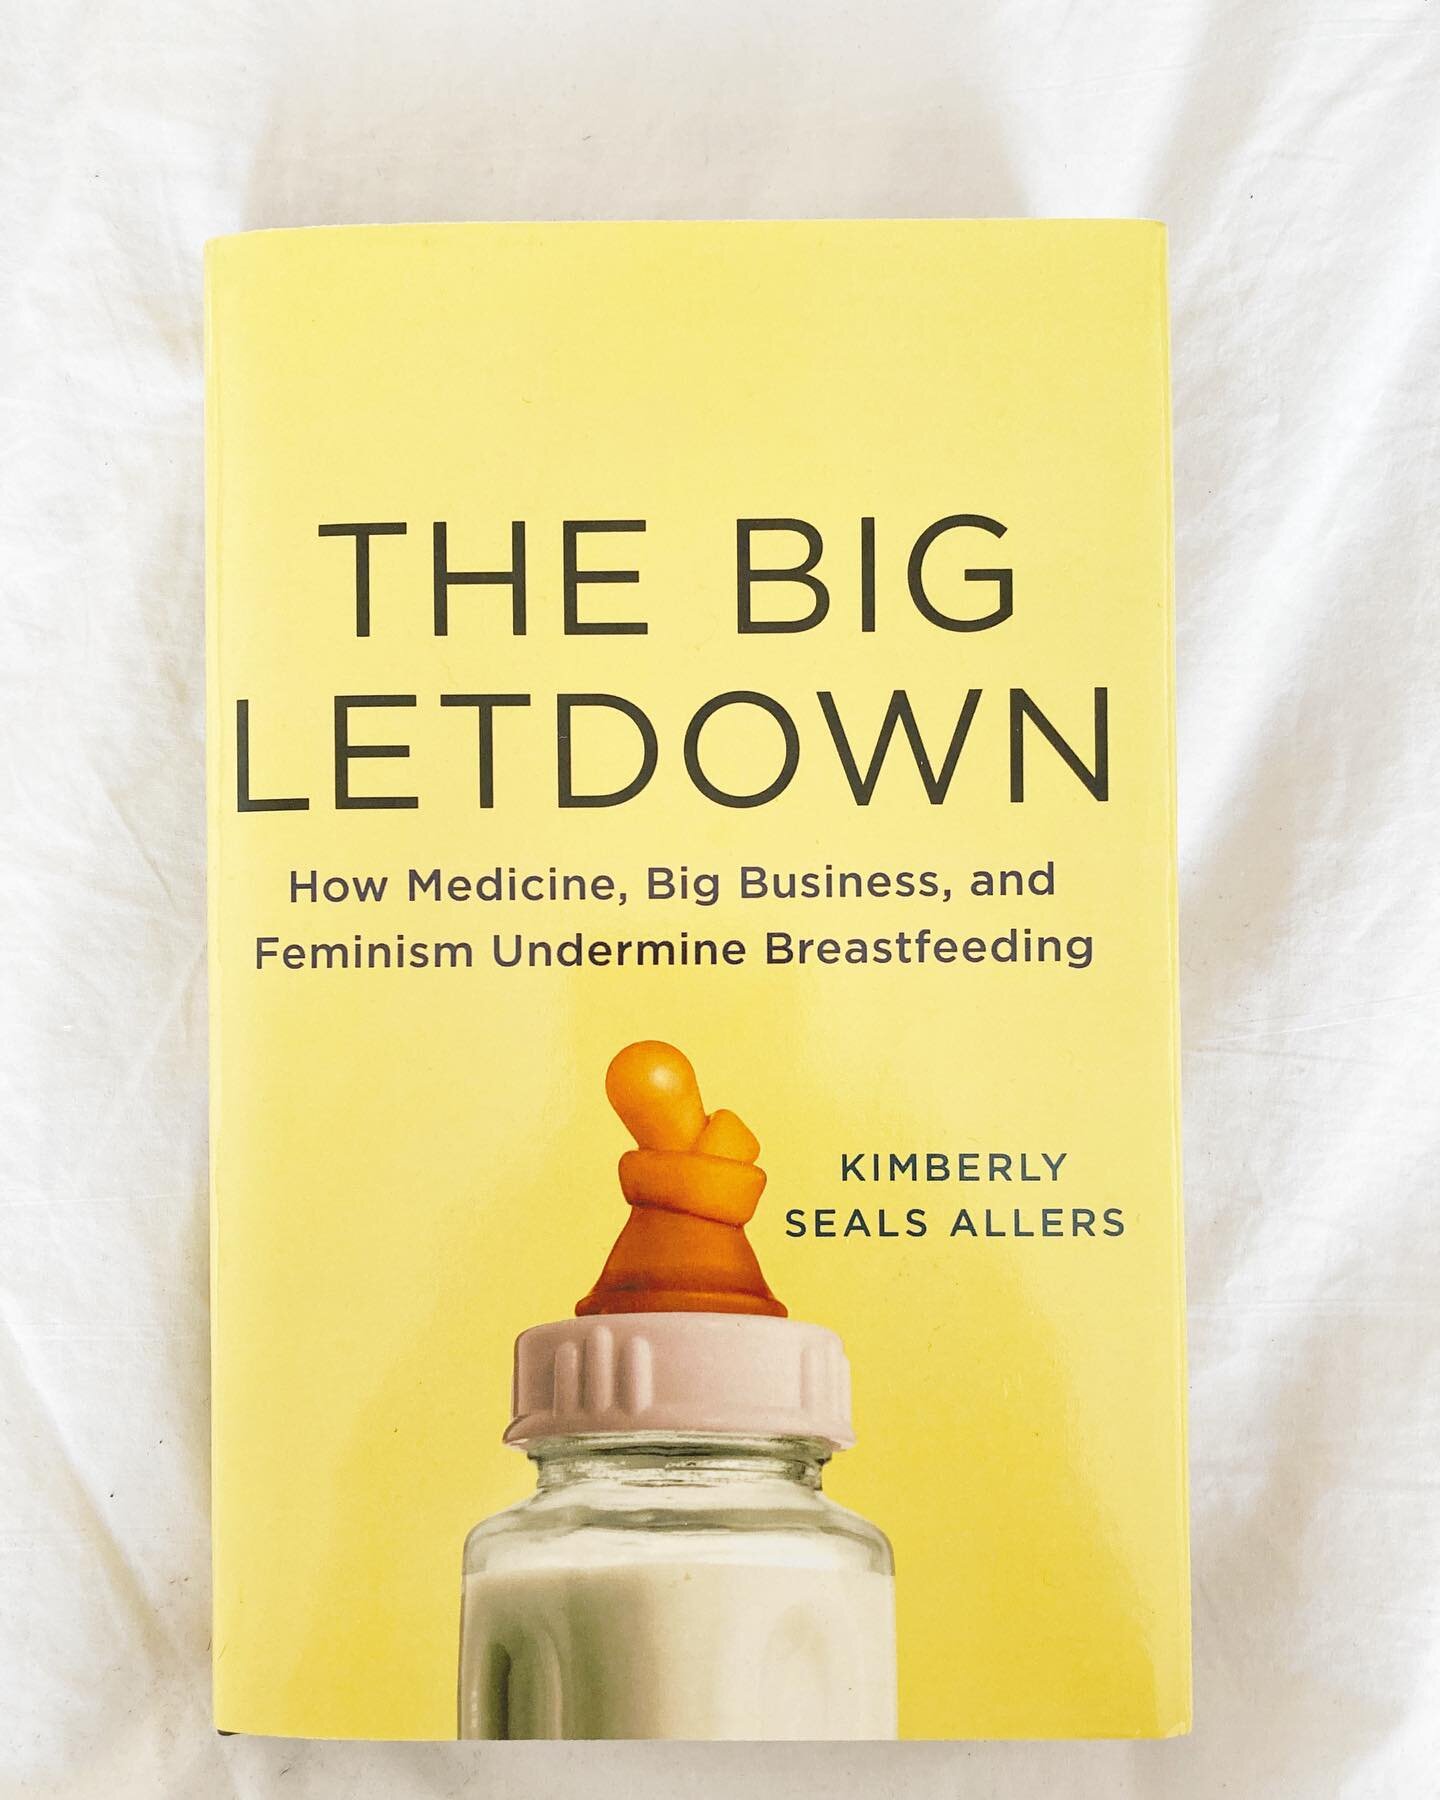 Snowy day eye opening read into the hurdles faced when wanting to chest/breast feed and how we are set up to fail before we&rsquo;ve even started. 

Some astounding numbers that make prolonged chest/breast feeding even harder:
&bull;Only 13% of worke